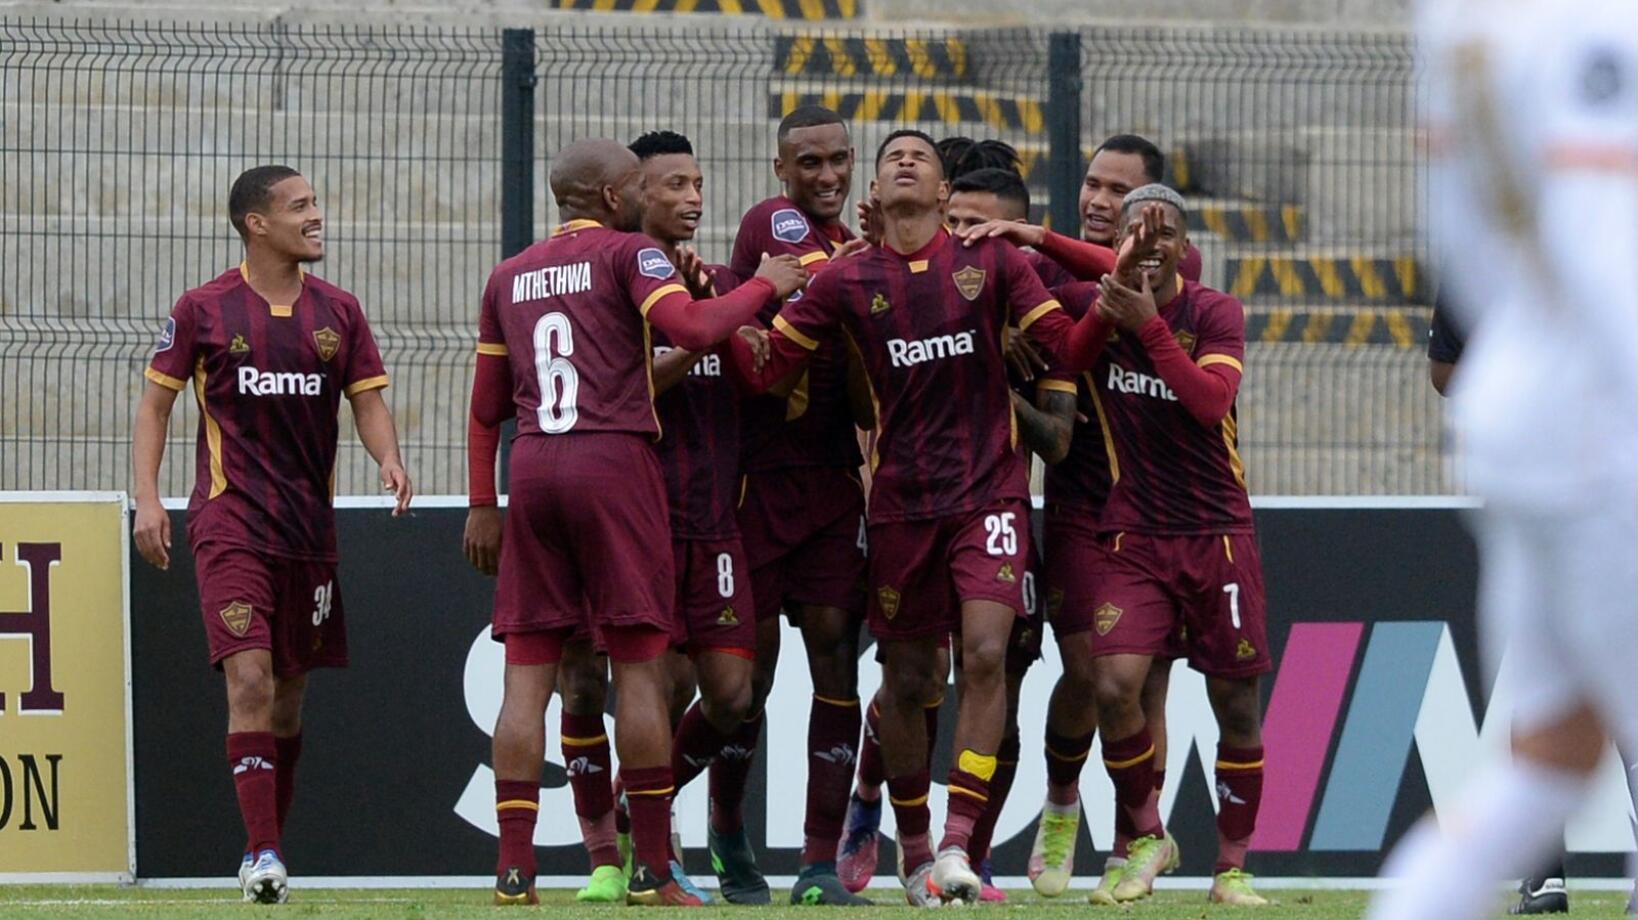 Stellenbosch FC players celebrate a goal scored by Oshwin Andries during their DStv Premiership game against Royal AM at Danie Craven Stadium in Stellenbosch on Saturday